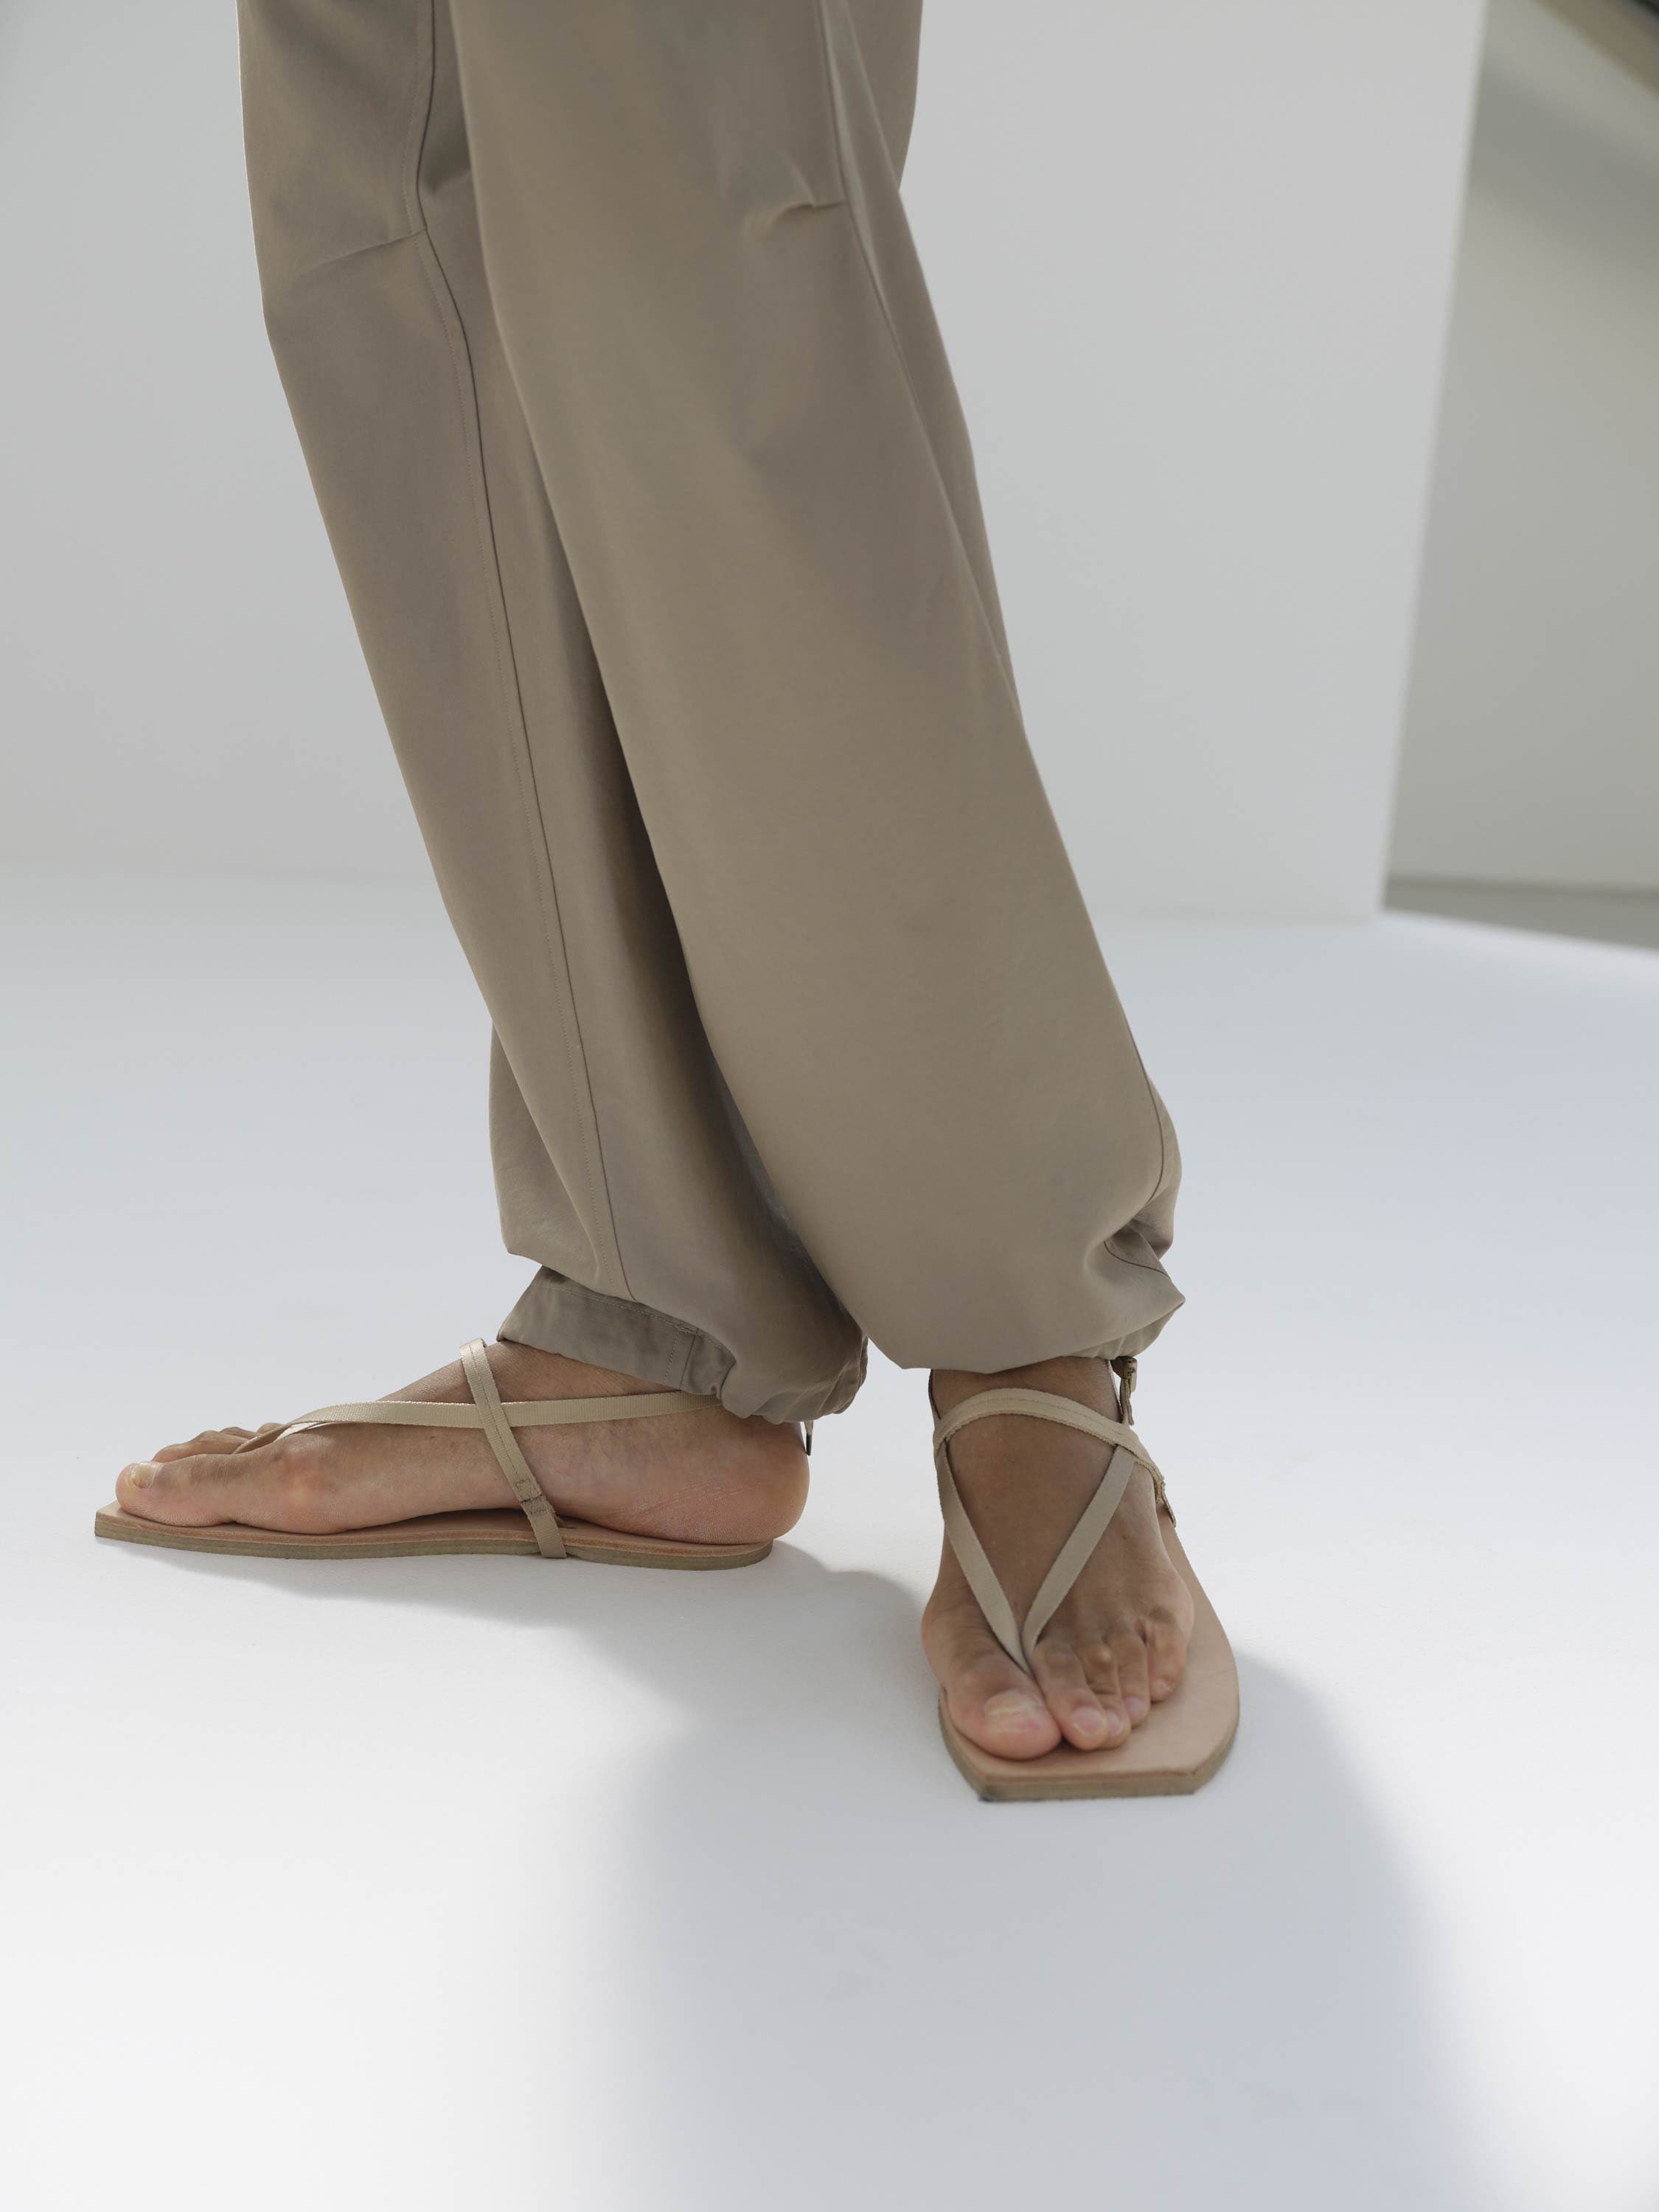 BELTED LEATHER SANDALS MADE BY FOOT THE COACHER 詳細画像 NATURAL BEIGE 1